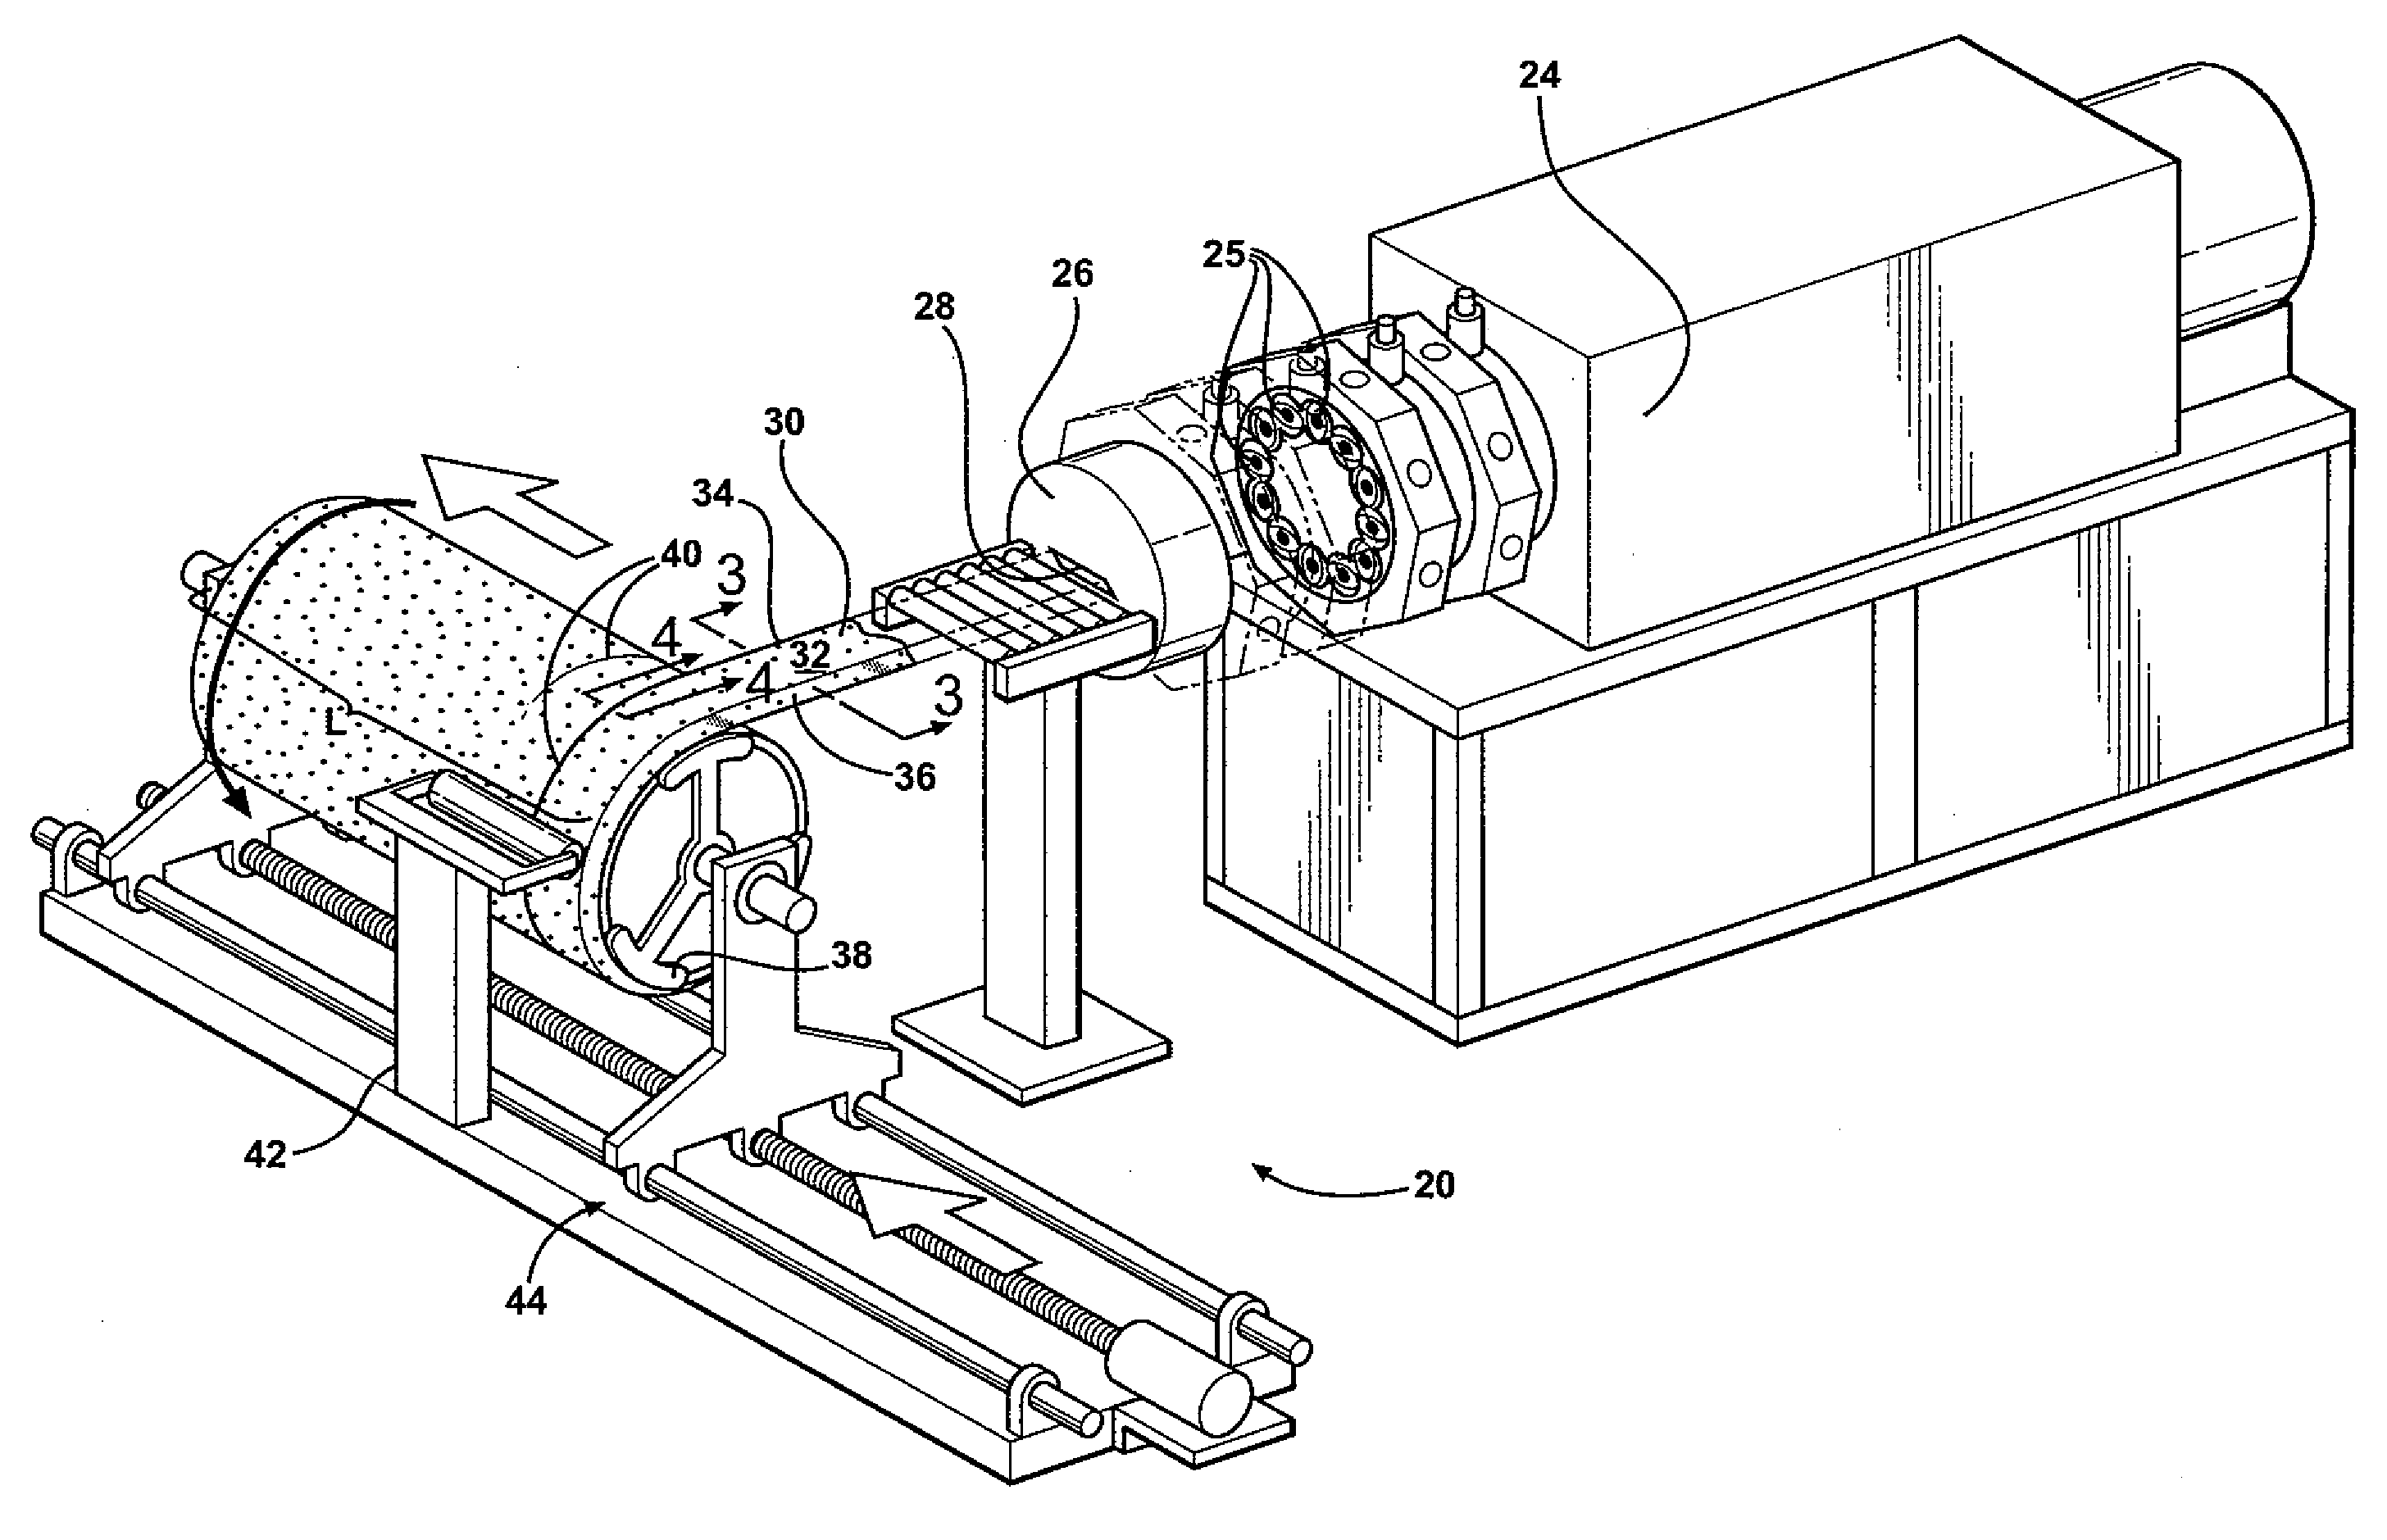 Manufacturing apparatus and method for producing a preform